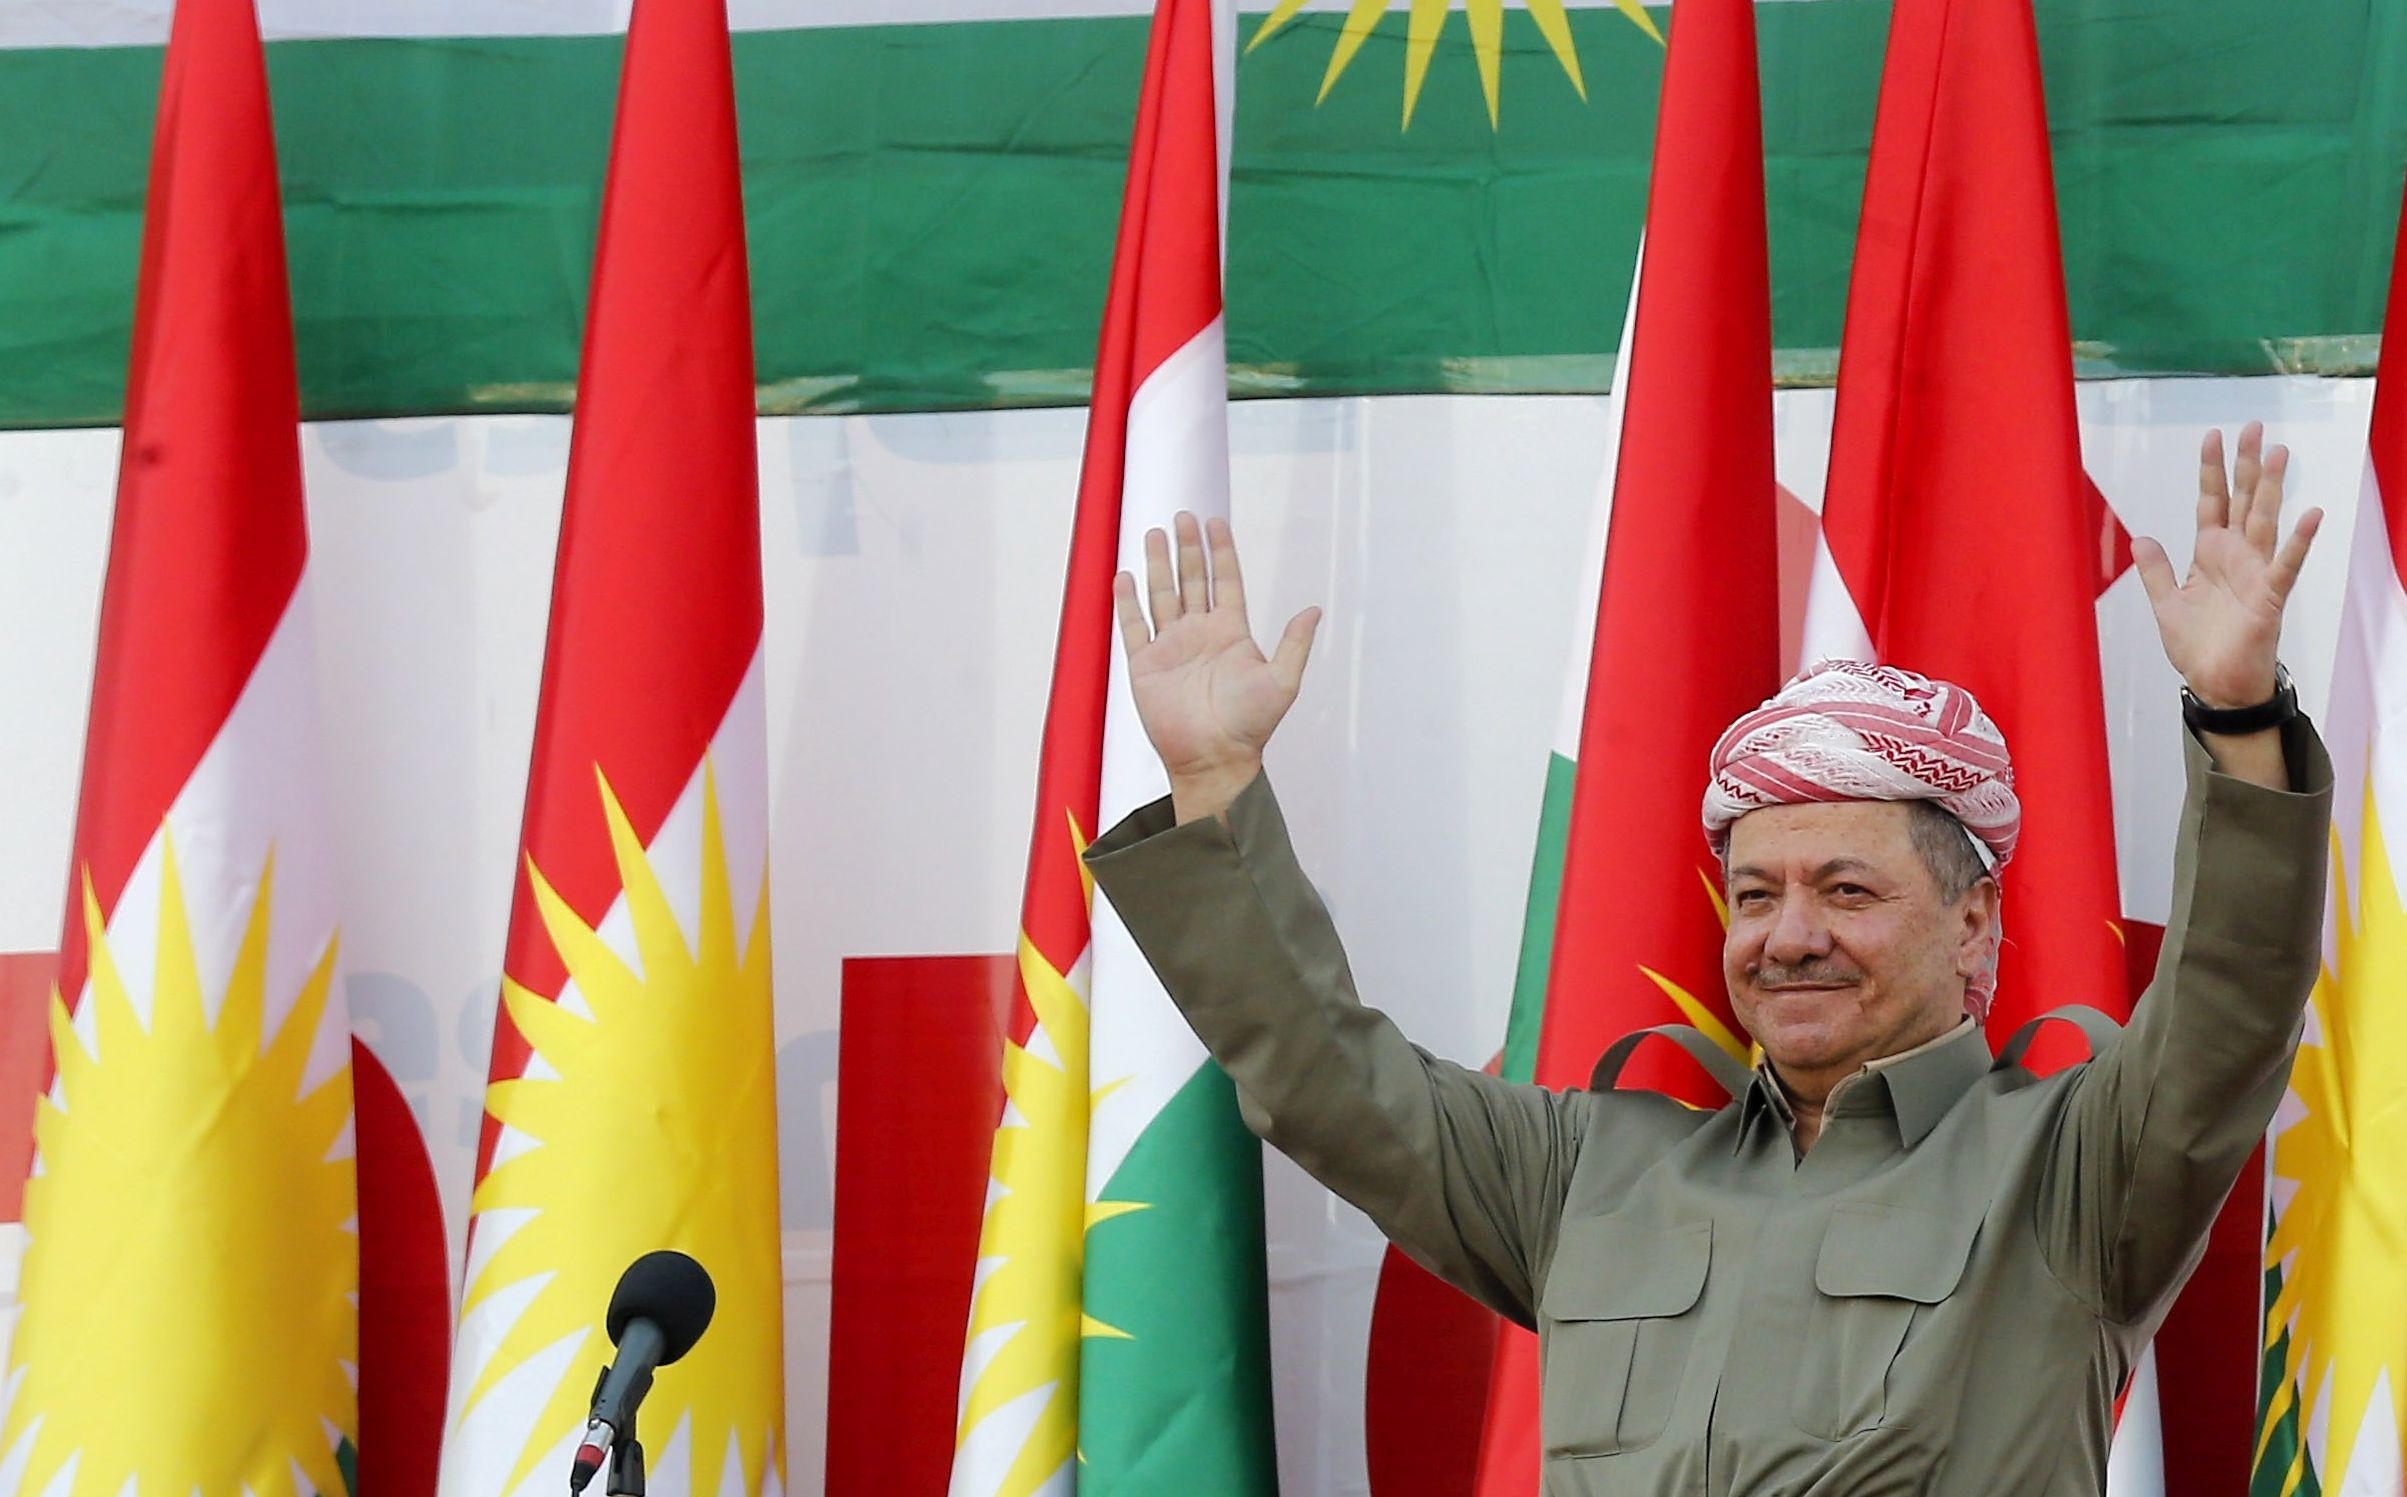 epa06220221 Iraq's Kurdistan region's President Massoud Barzani take part in a rally for the Kurdistan independence referendum campaign at the Franso Hariri stadium in Erbil, Iraq, 22 September 2017. The Kurdistan region is an autonomous region in northern Iraq since 1991, with an estimated population of 5.3 million people. The region share borders with Turkey, Iran, and Syria, all of which have large Kurdish minorities. On 25 September the Kurdistan region holds a referendum for independence and the creation of the state of Kurdistan amidst divided international support.  EPA/MOHAMED MESSARA